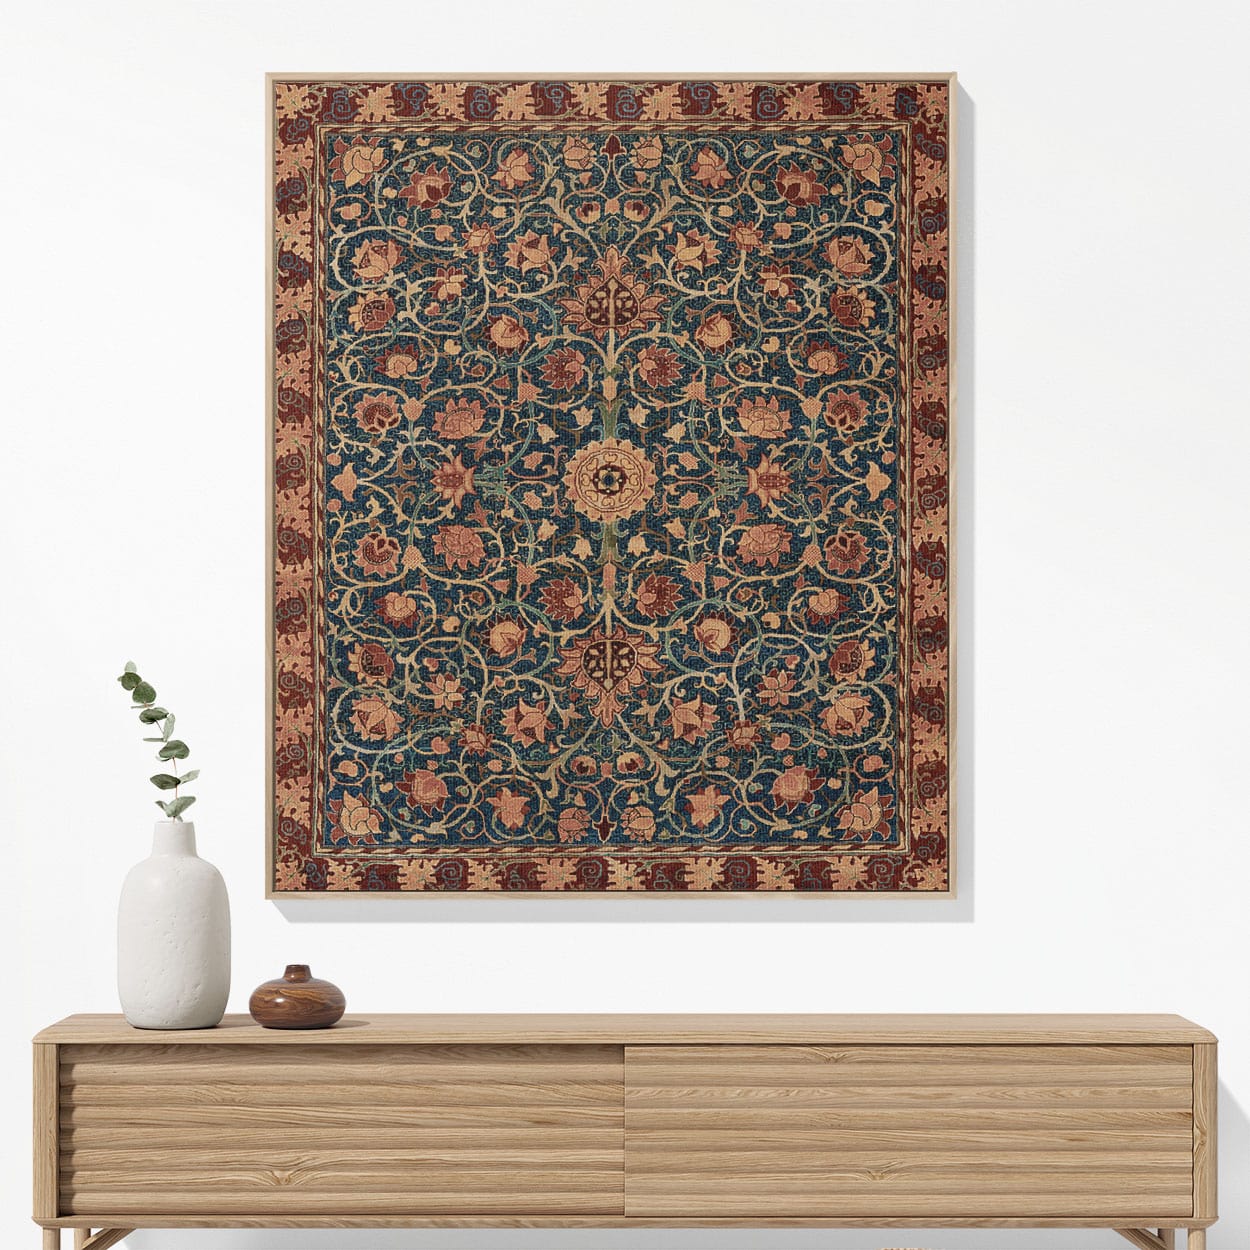 Aesthetic Floral Woven Blanket Woven Blanket Hanging on a Wall as Framed Wall Art